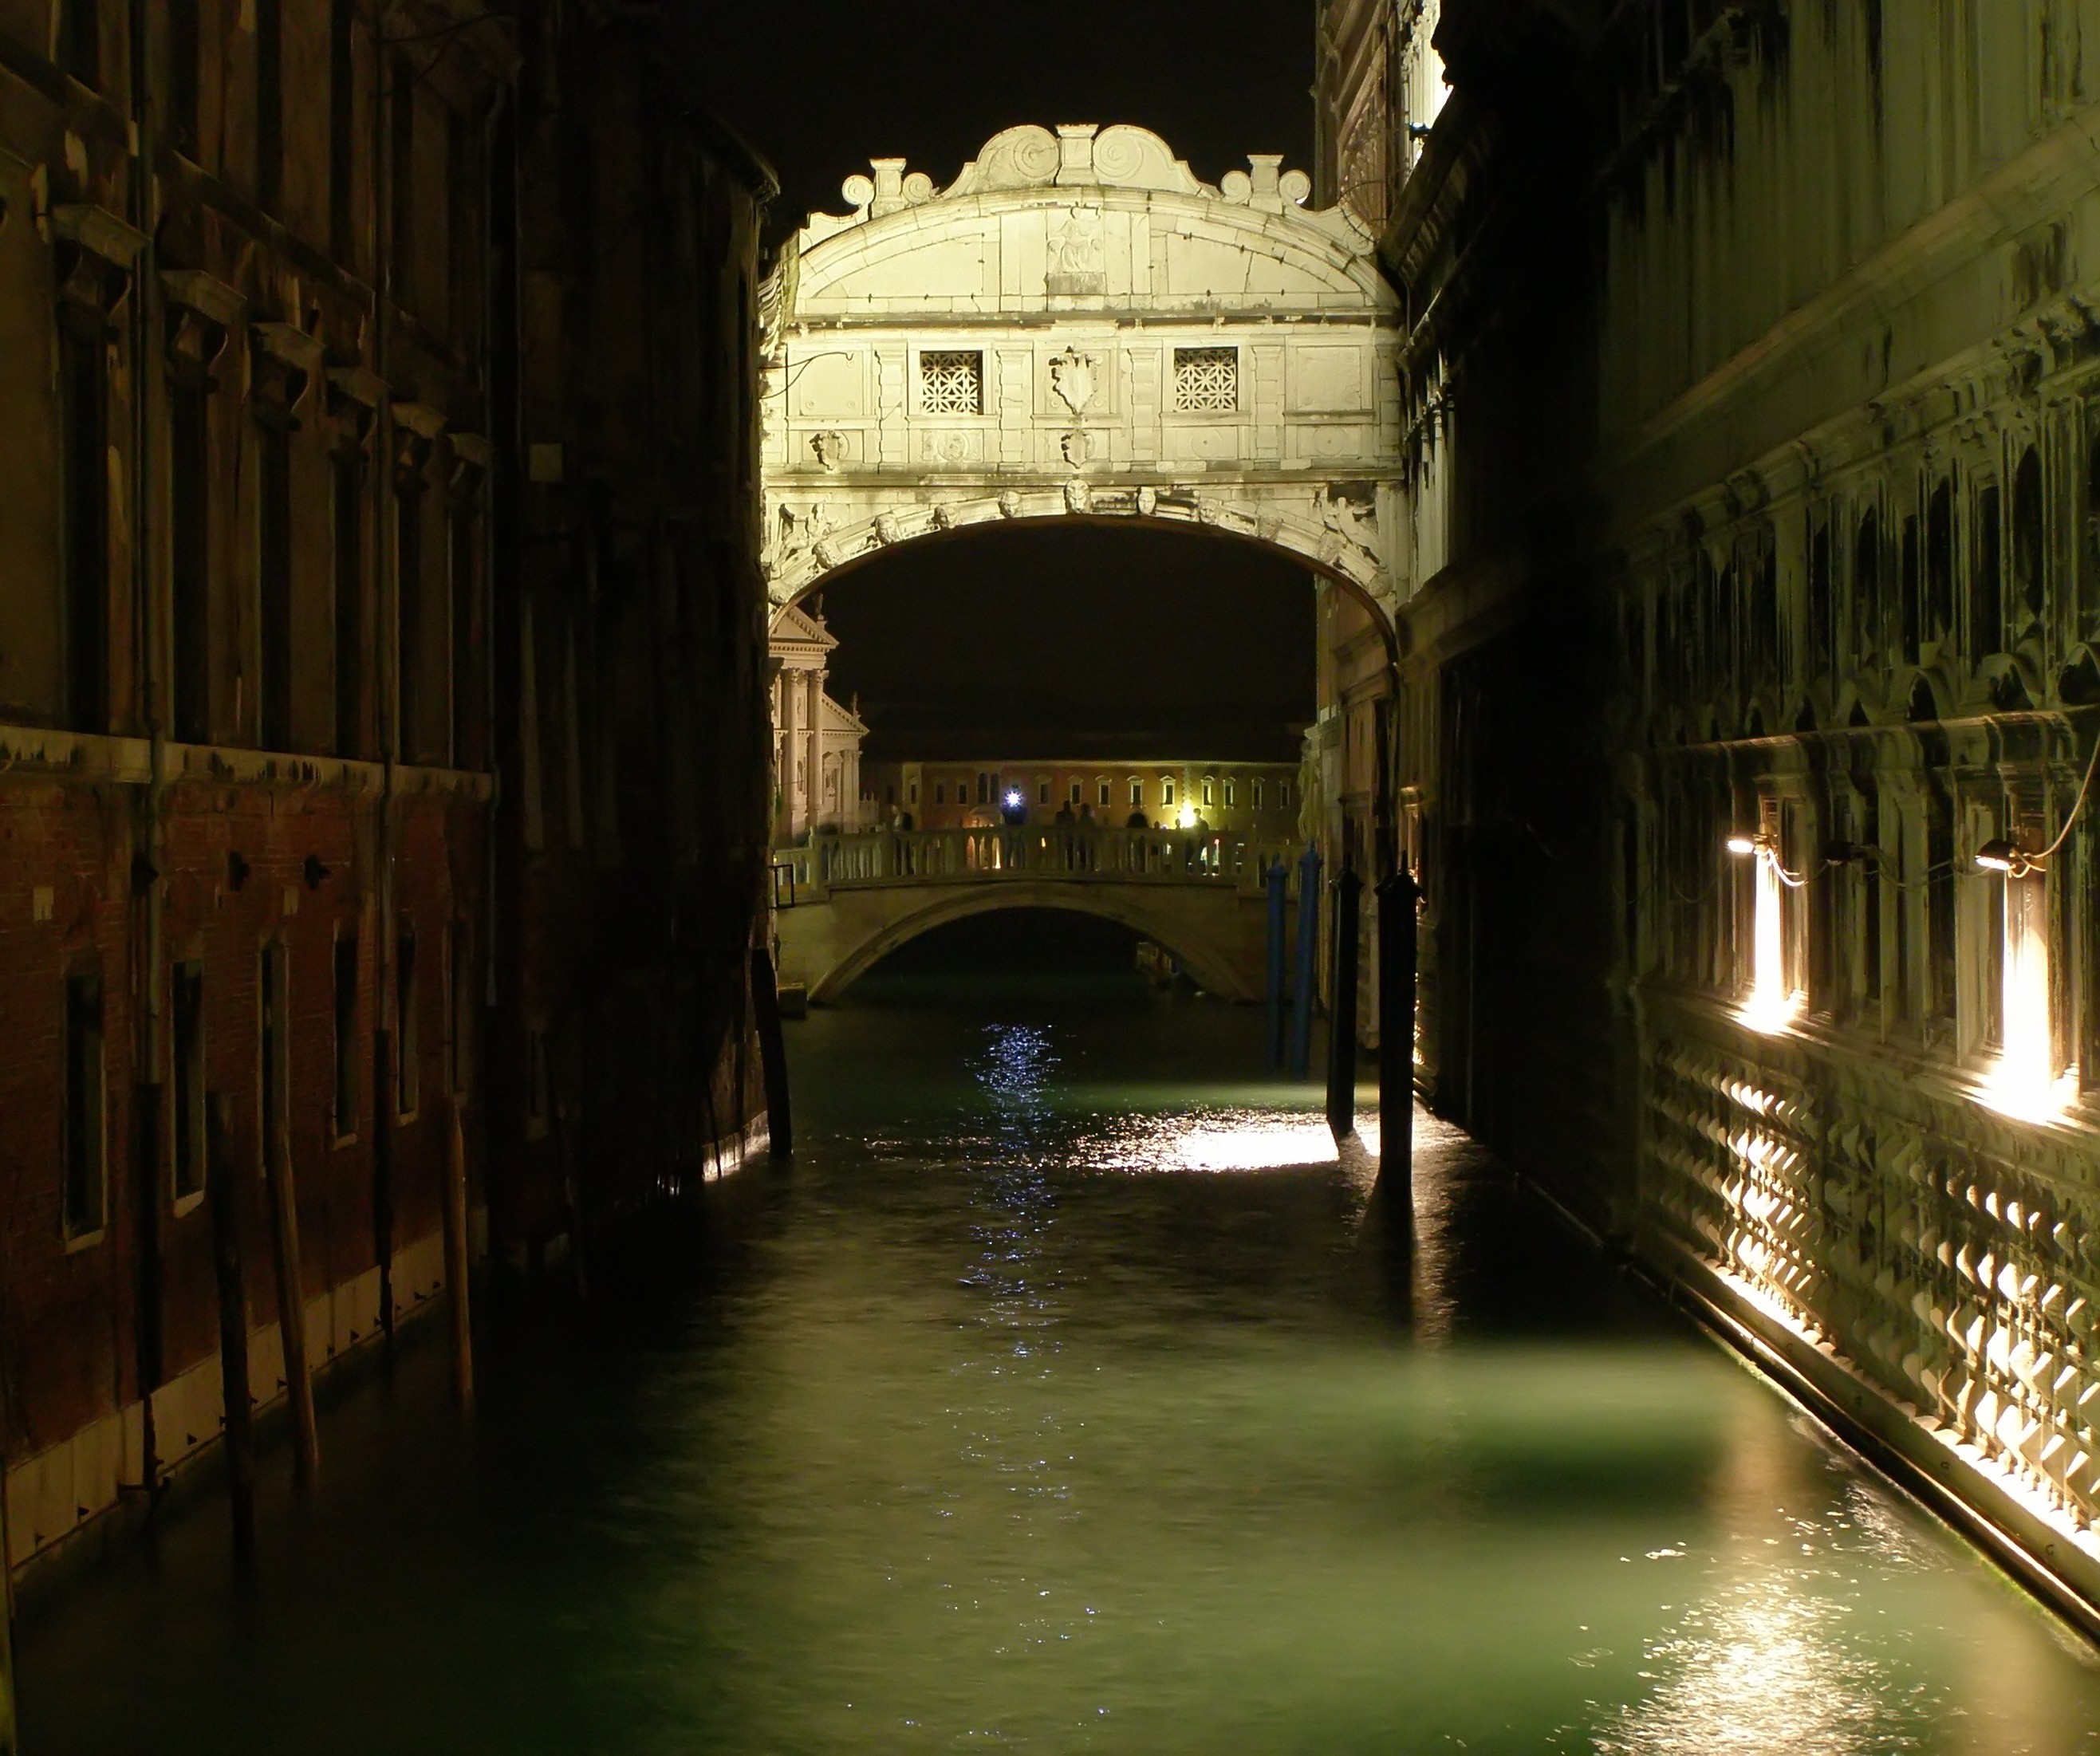 Like the bridge of sighs, baroque music described humans crossing a bridge in life towards eternity. Surrounded by dark choices but inspired by faith.